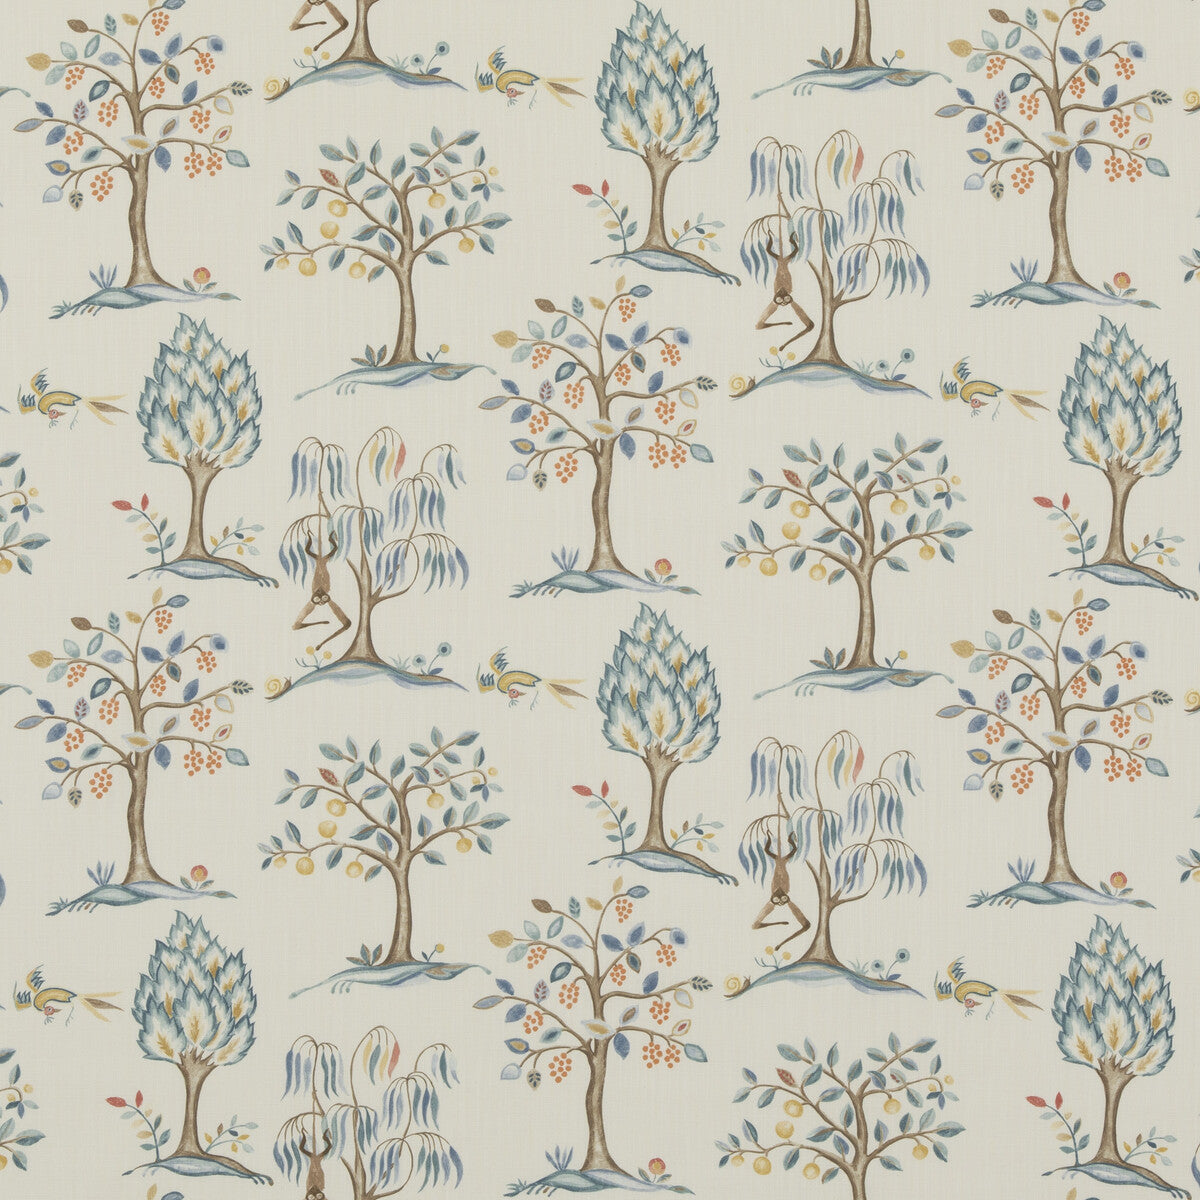 Lilliput fabric in blue color - pattern PP50501.1.0 - by Baker Lifestyle in the Bridport collection